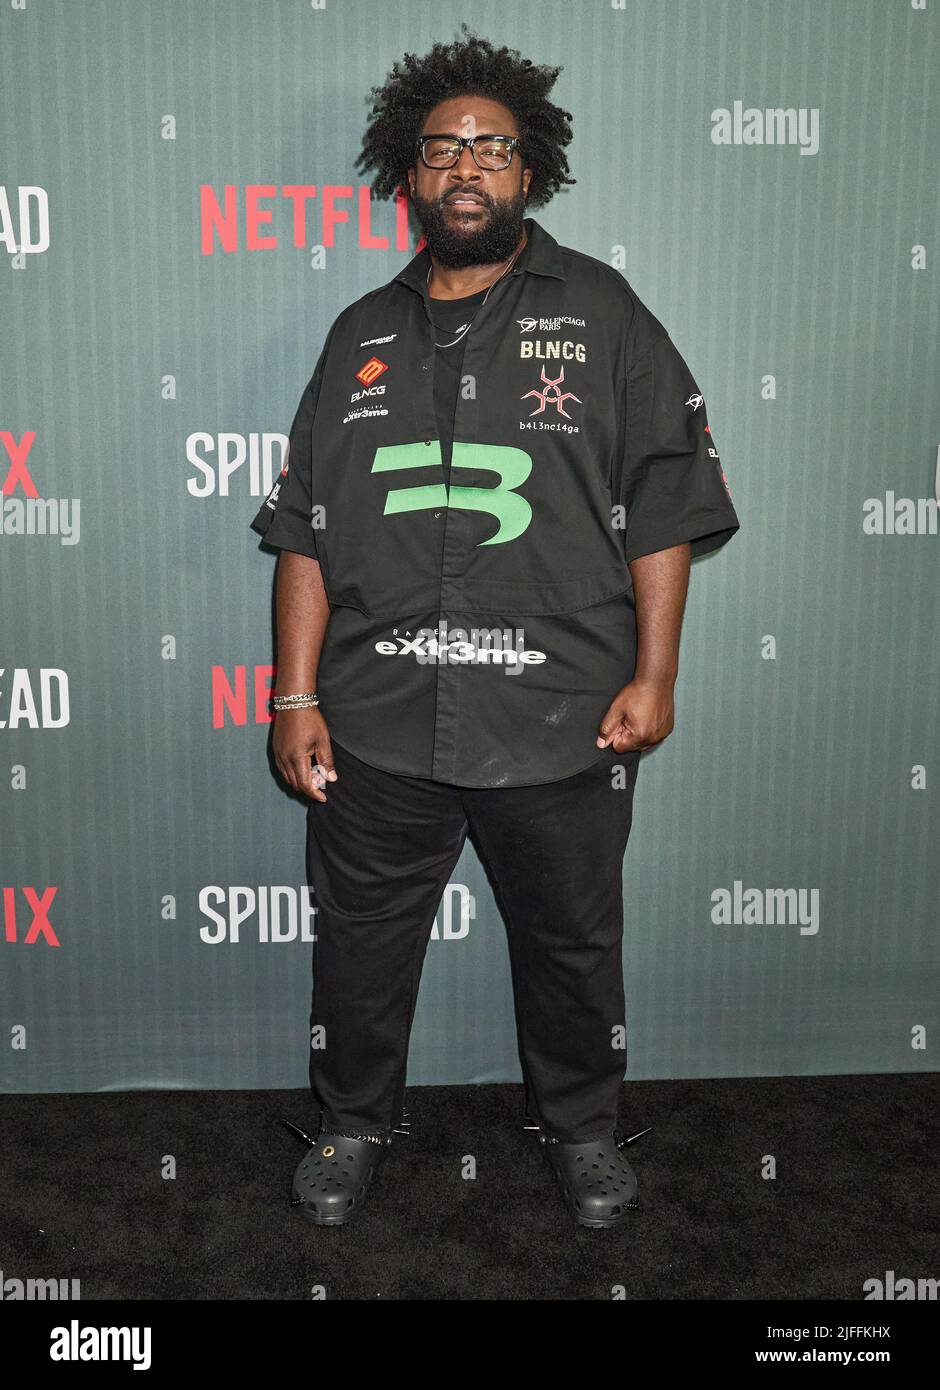 NEW YORK, NY, USA - JUNE 15, 2022: Questlove attends the New York Premiere of Netflix's "Spiderhead" at the Paris Theater. Stock Photo